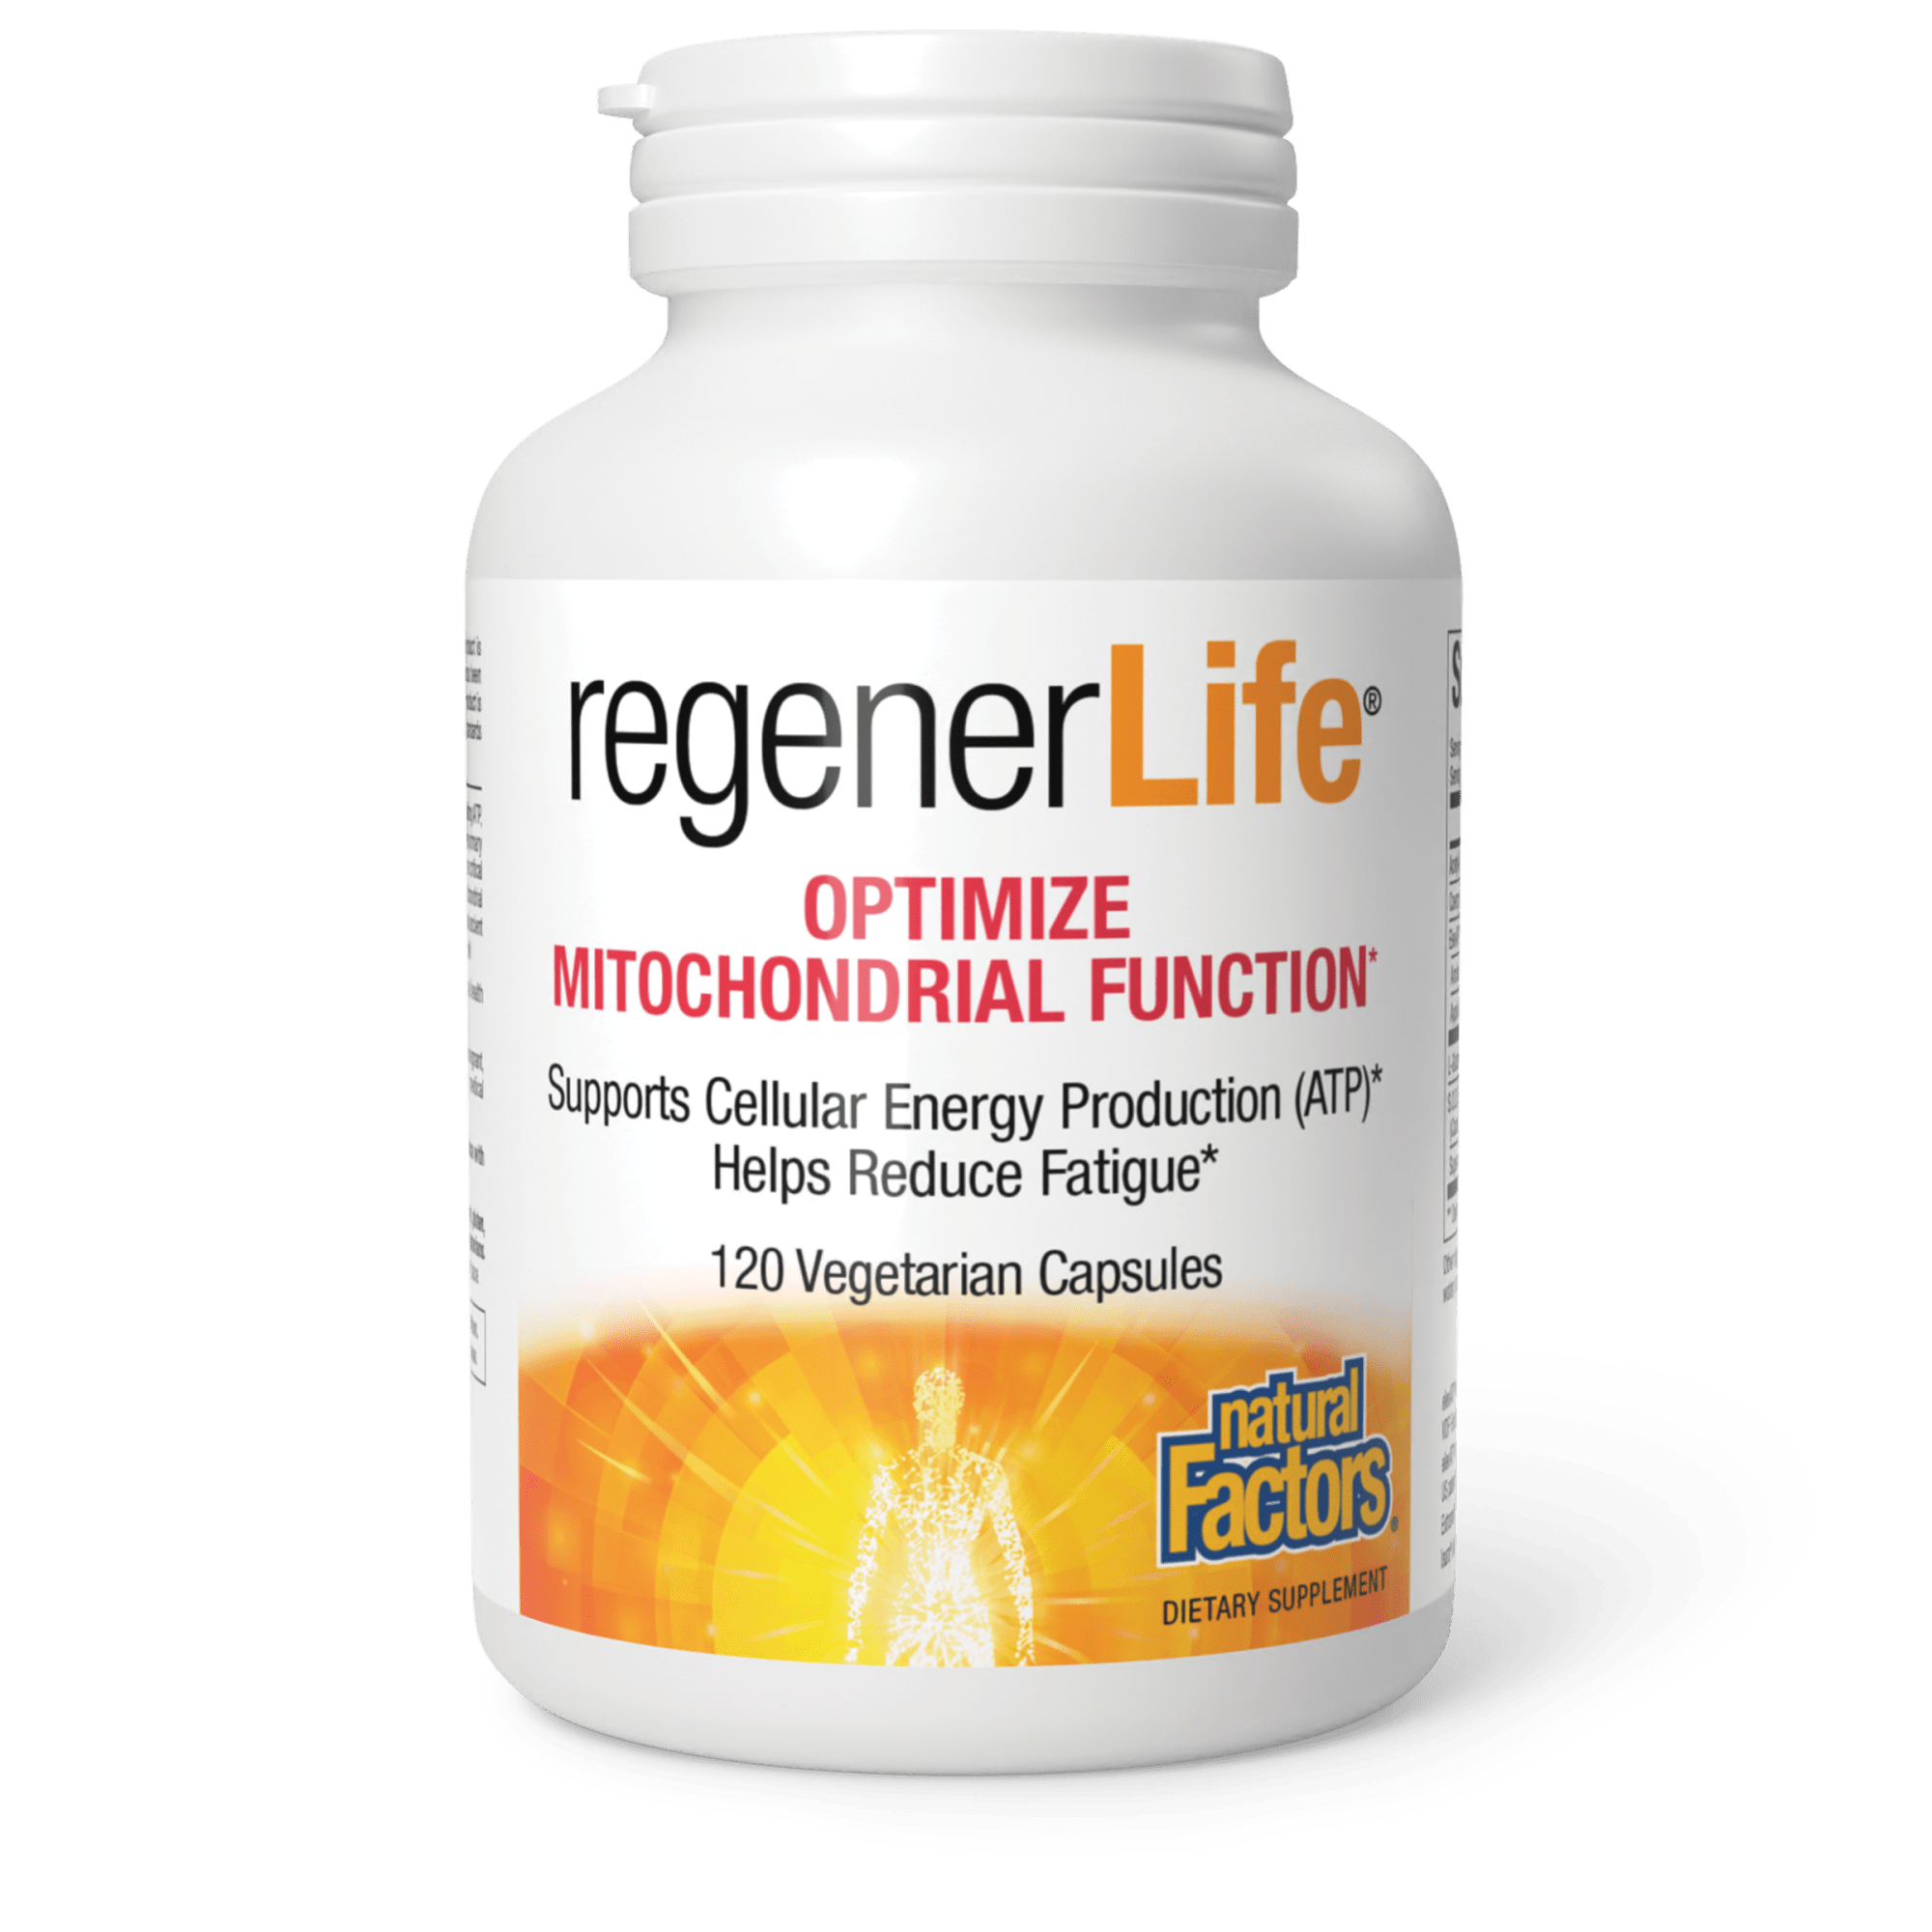 Supplements for improved cellular energy production